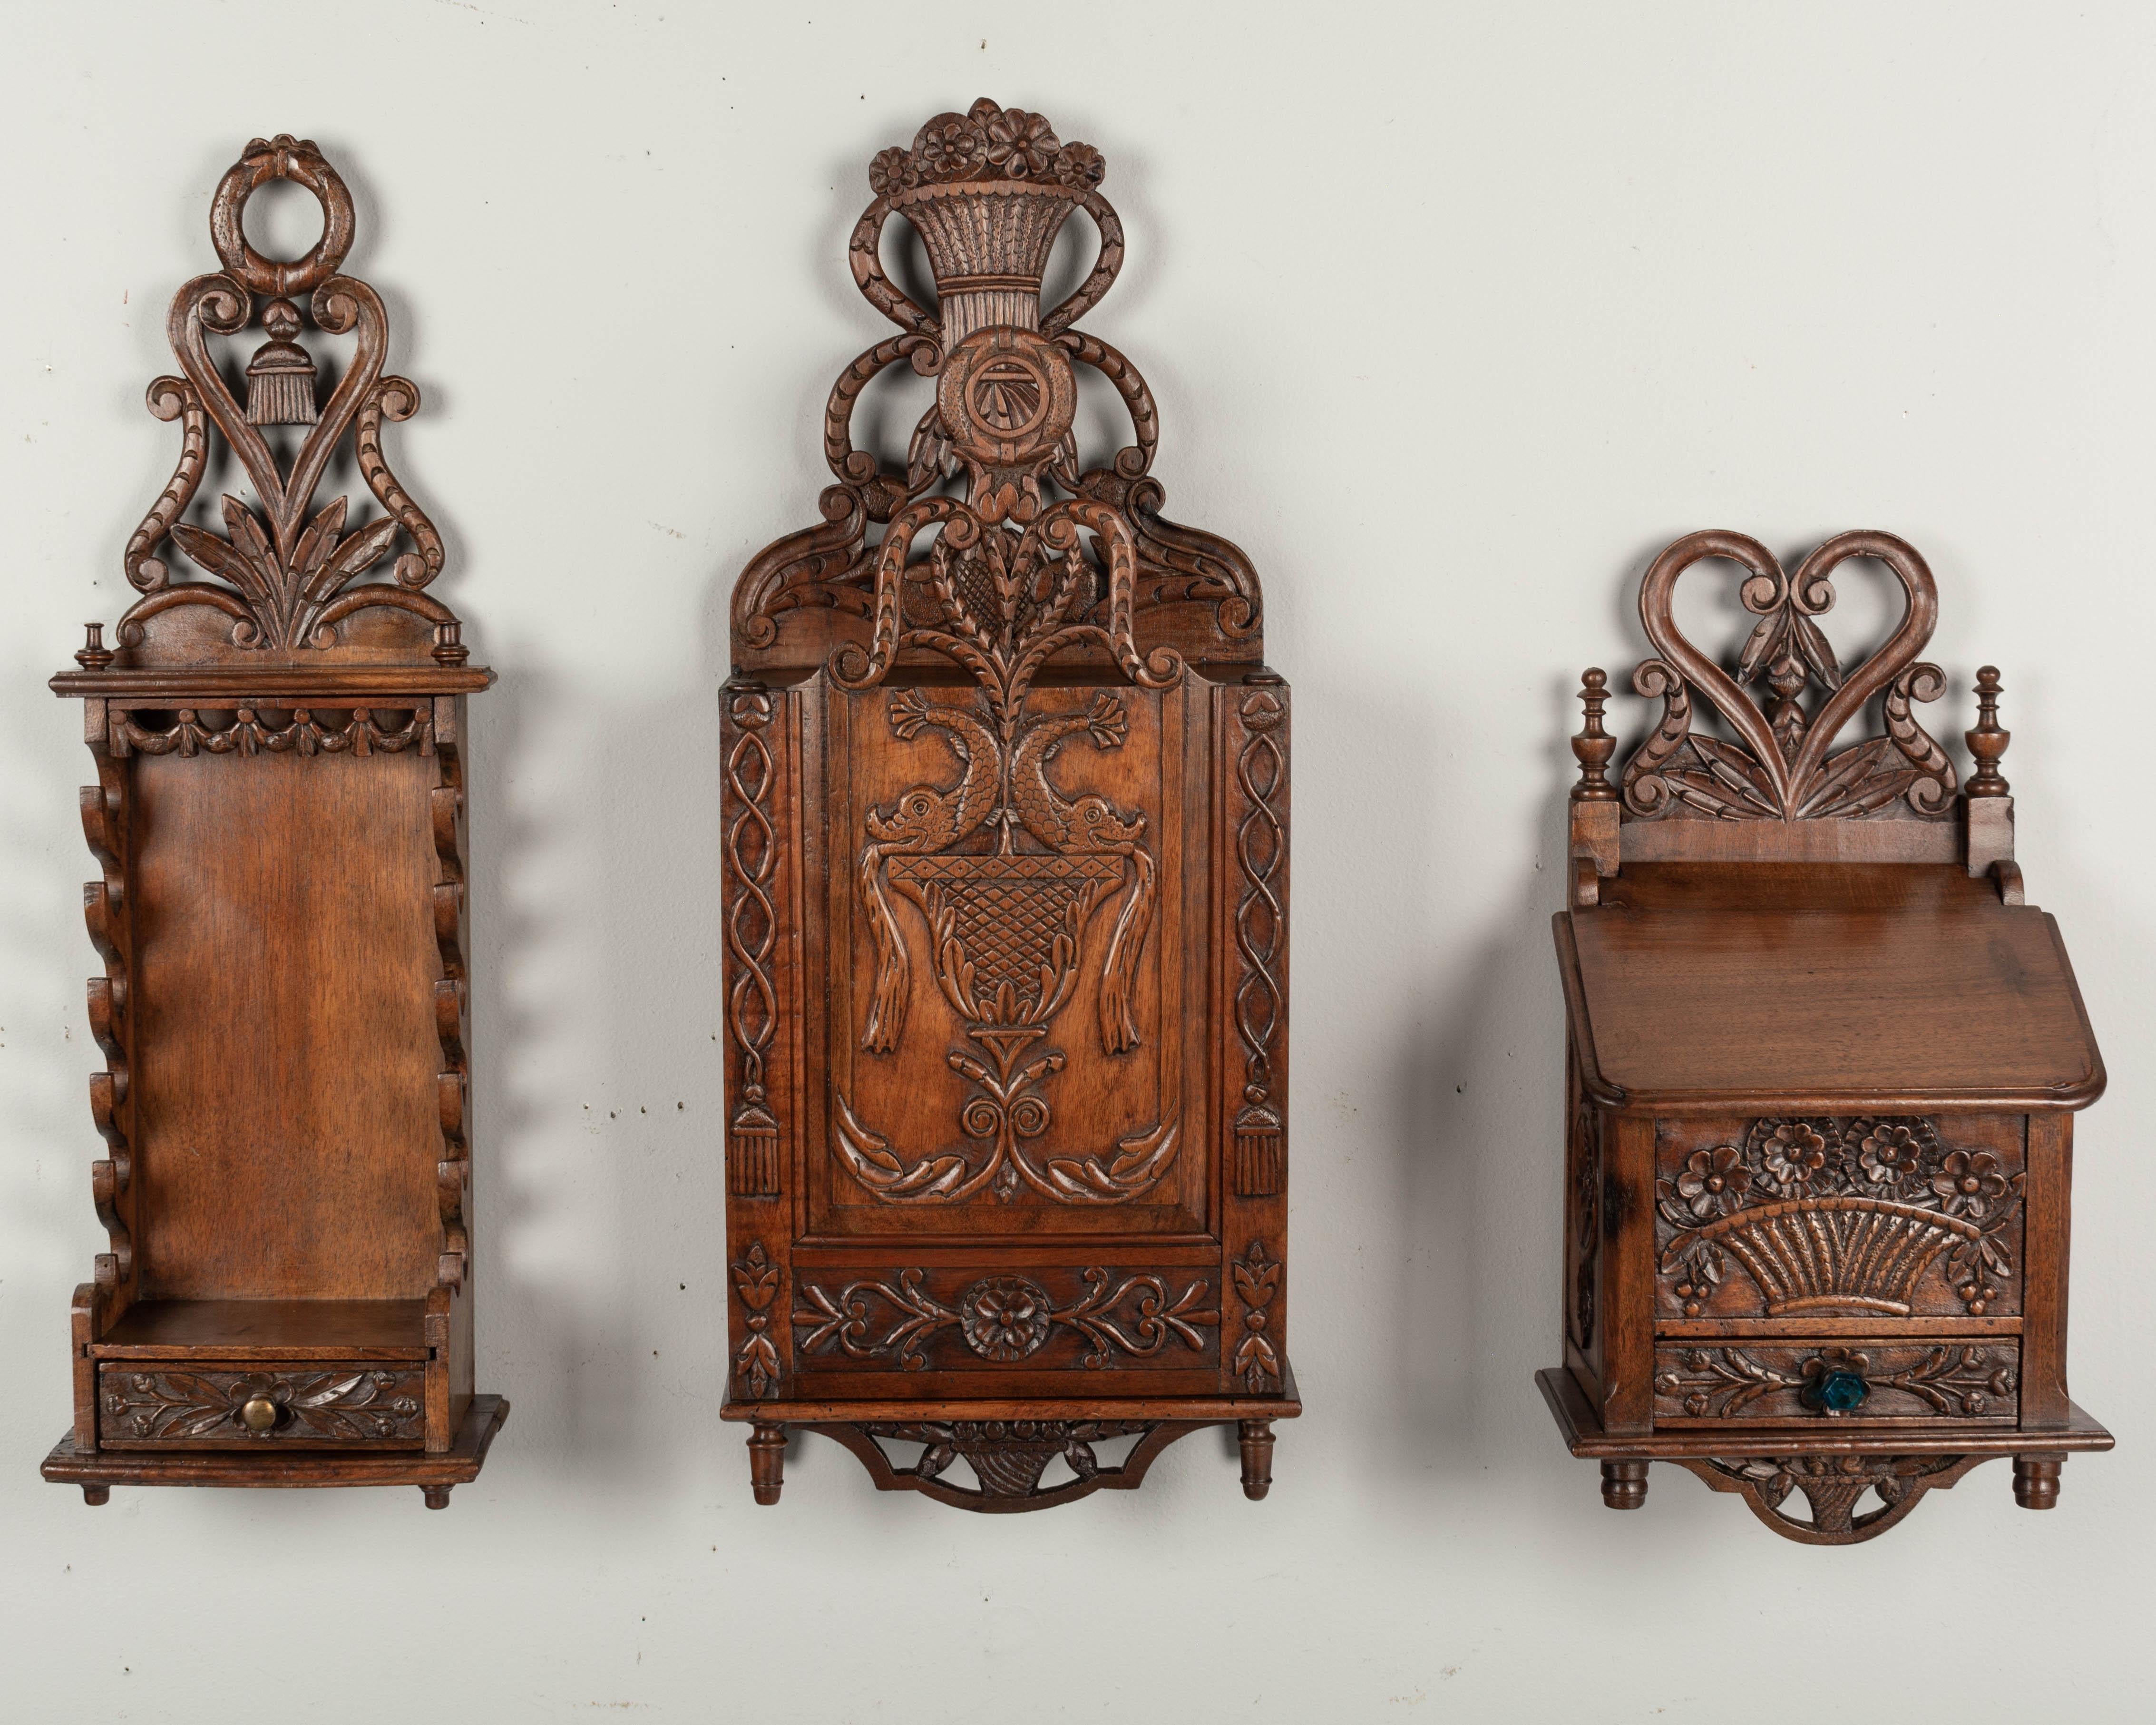 A set of three early 20th century French Provencal decorative boxes including a a porte couteaux, or knife rack, a fariniere, or flour box and a boite à sel, or salt box. Each made of walnut with fine hand-carved decoration and elaborate pierced